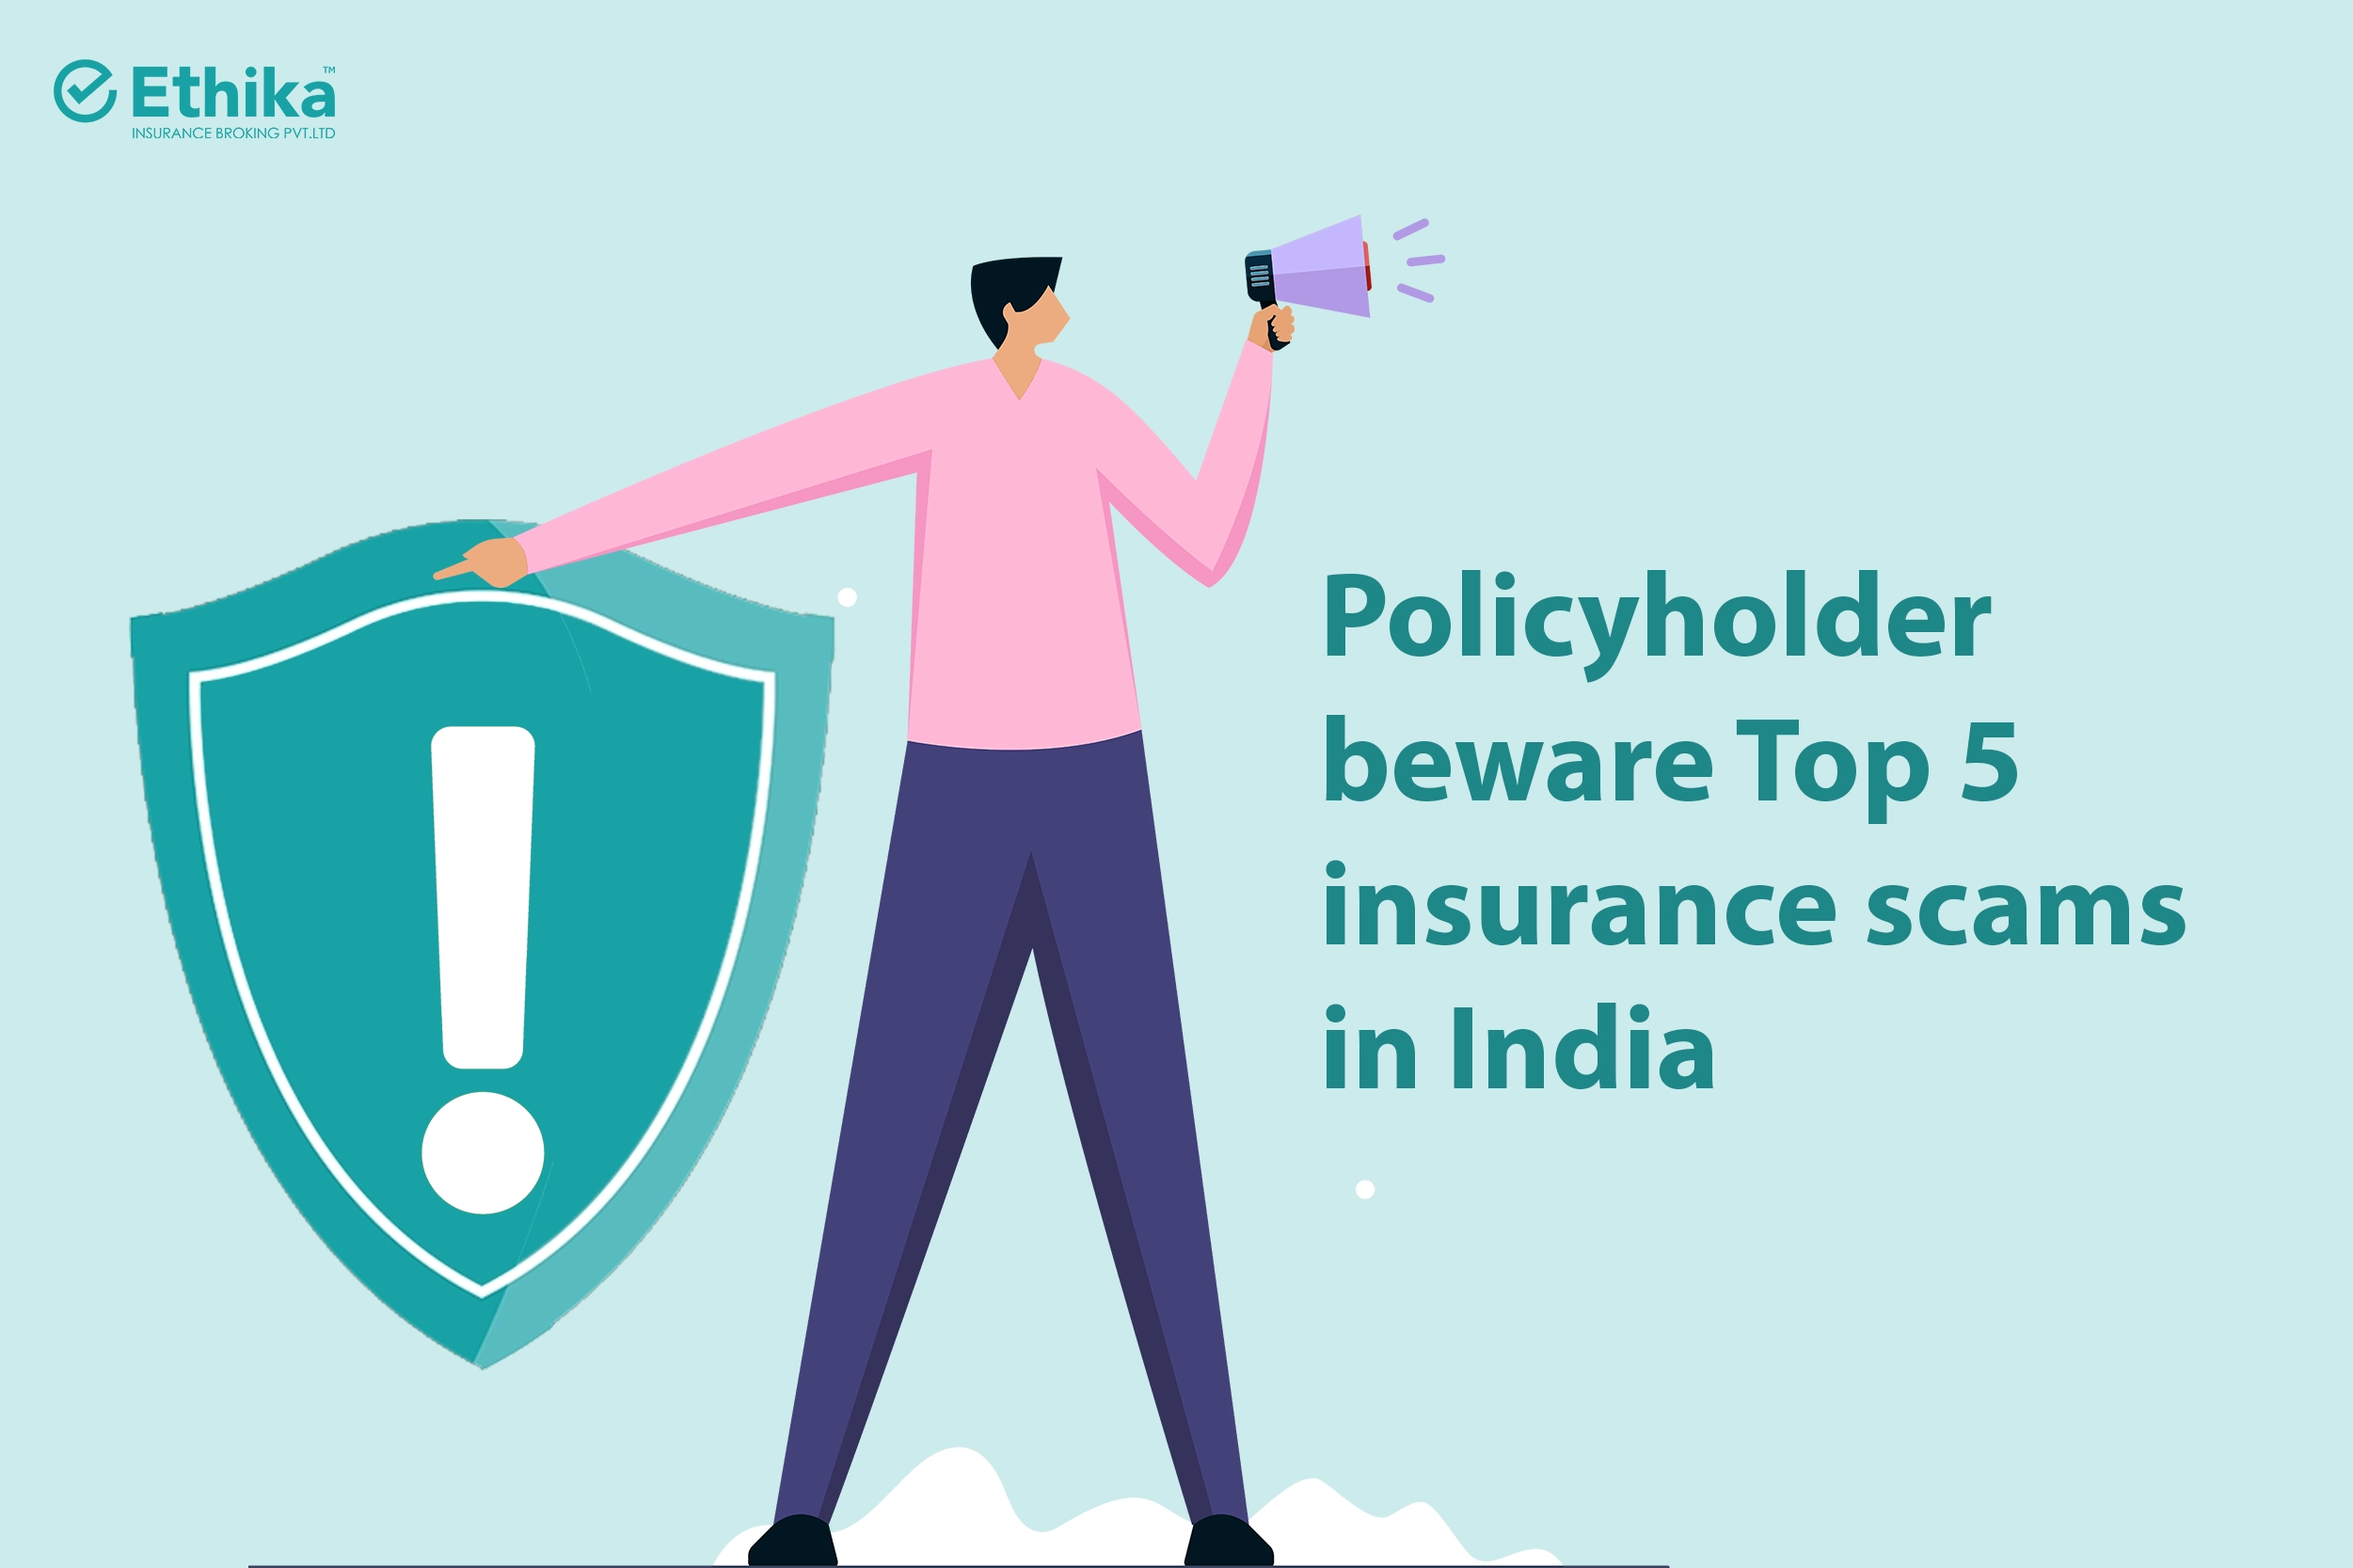 Policyholder Beware - Top 5 Insurance Scams in India